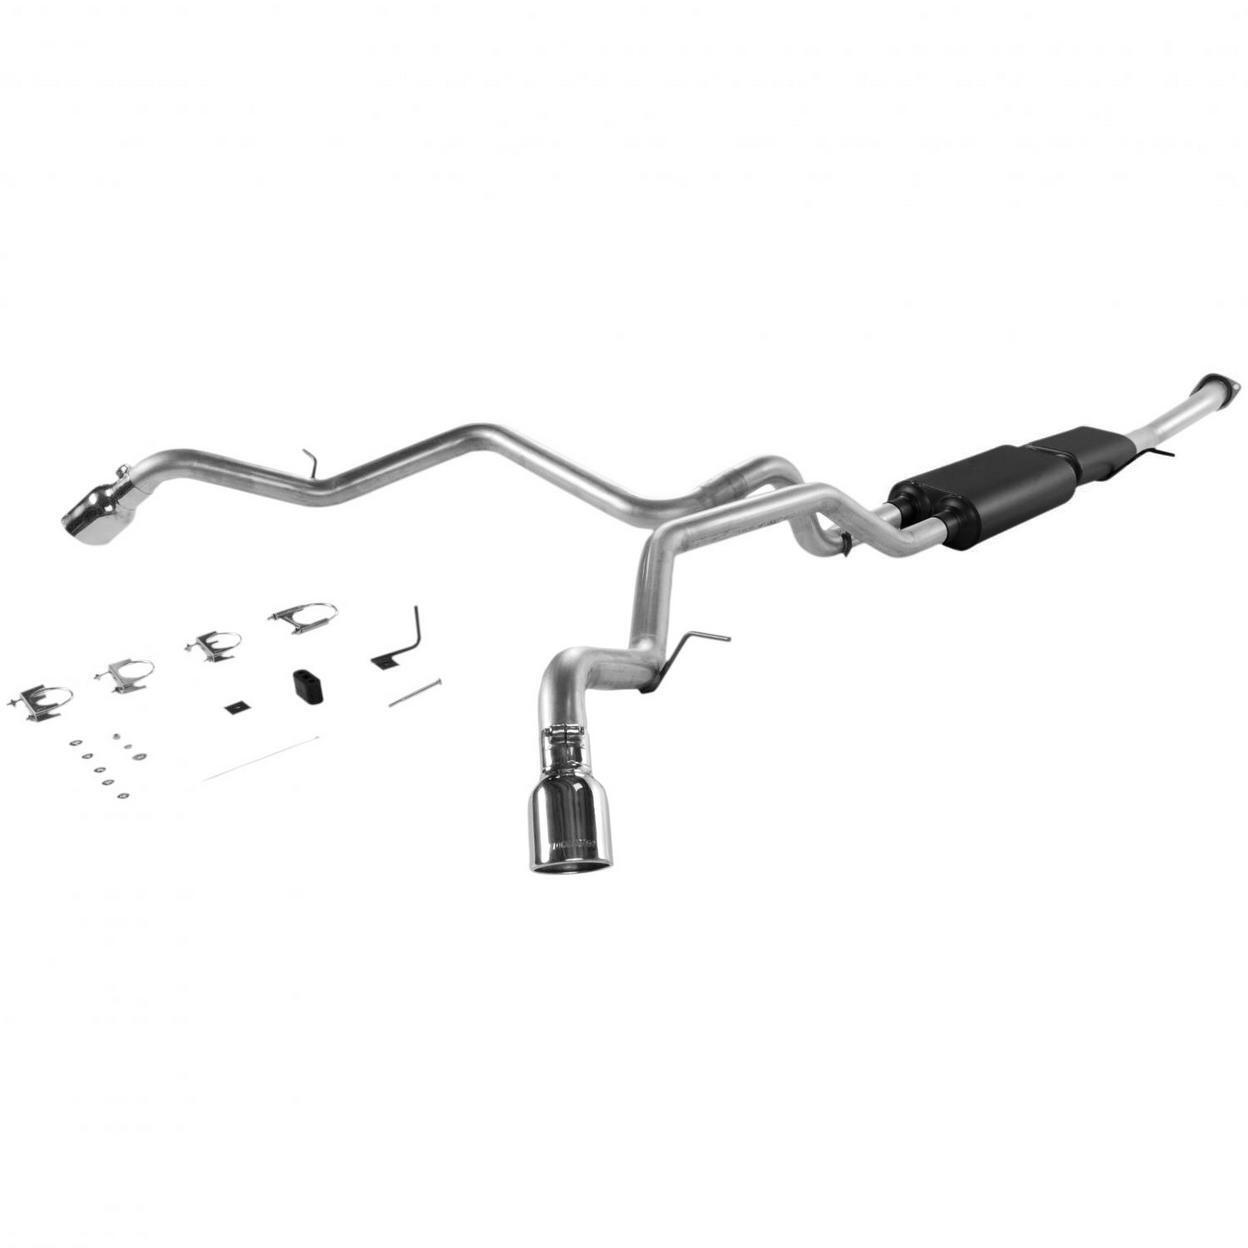 Flowmaster Exhaust System Kit - Fits 2001-2006 Chevrolet Suburban; Avalanche and